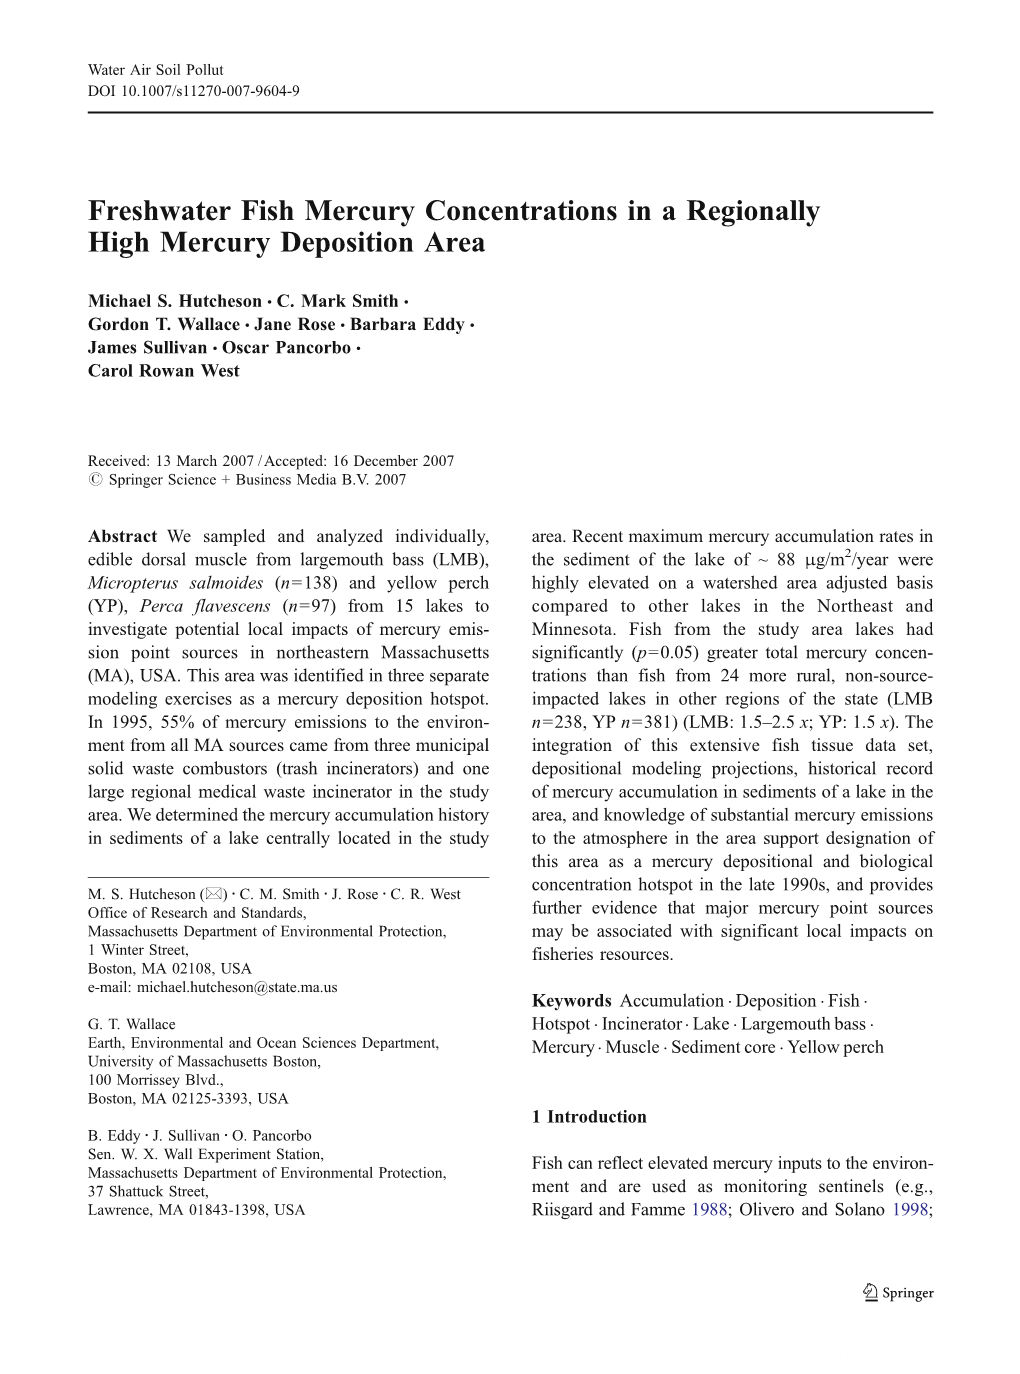 Freshwater Fish Mercury Concentrations in a Regionally High Mercury Deposition Area